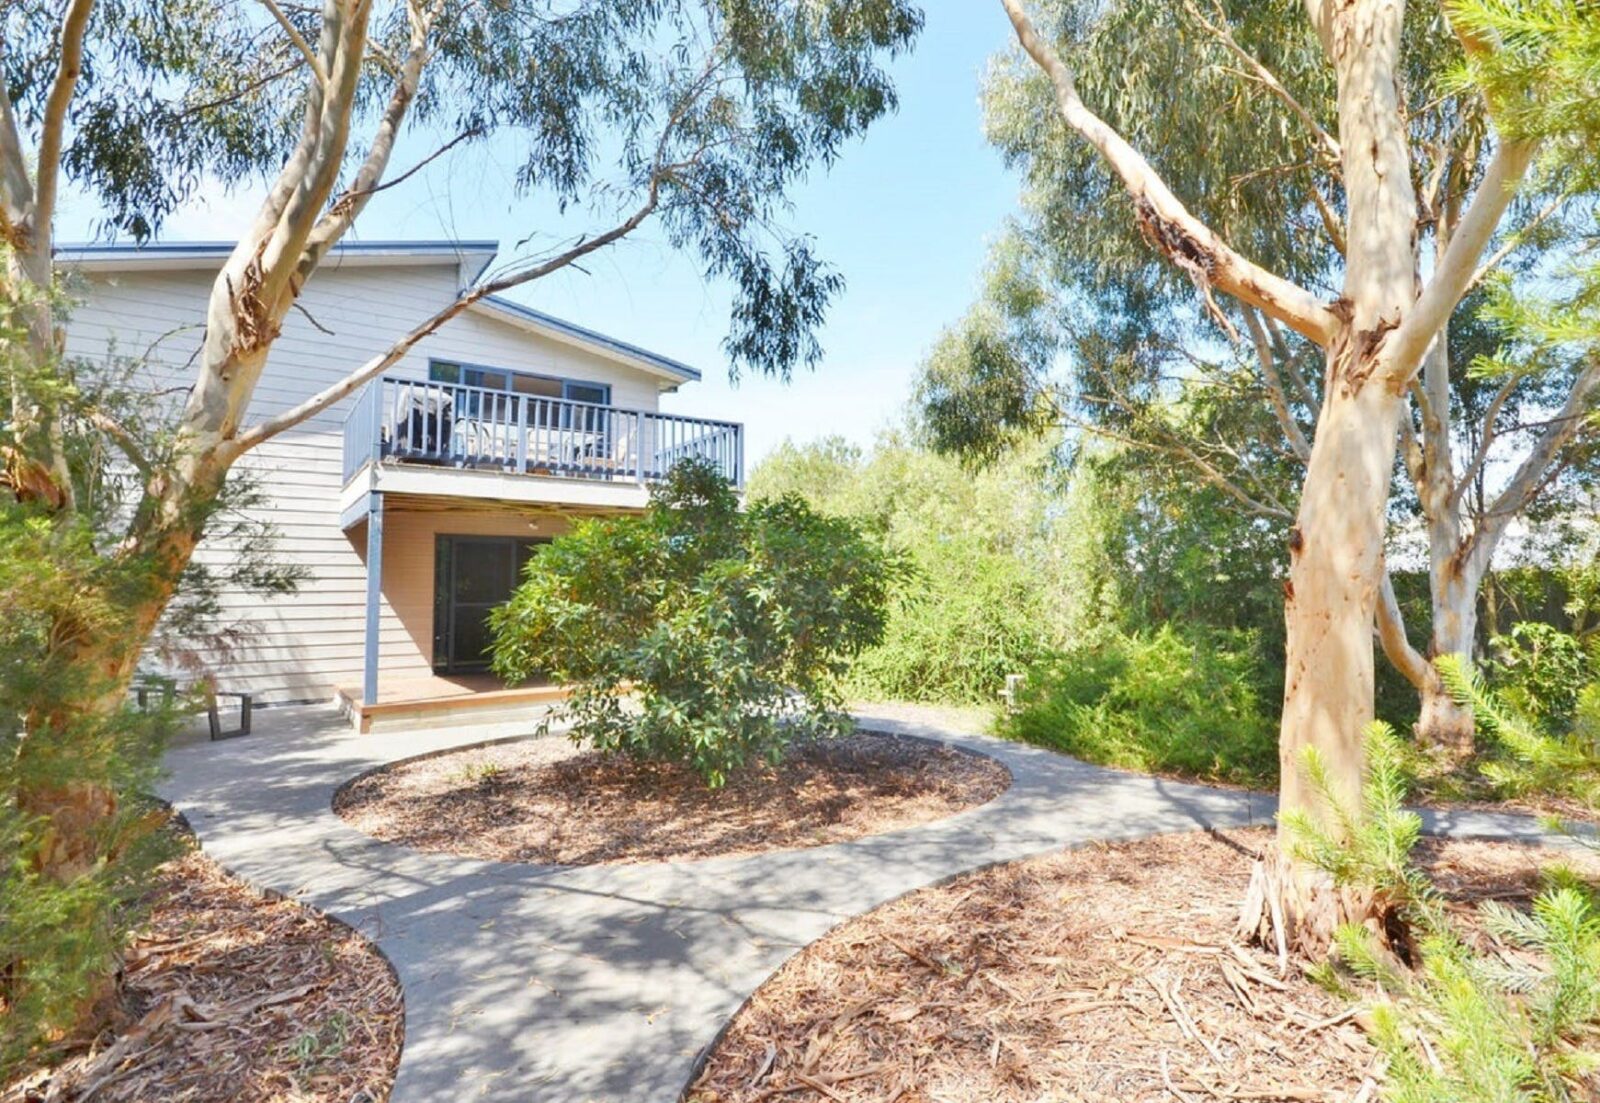 Image of two storey weatherboard house in treed setting showing path through mulch and native garden